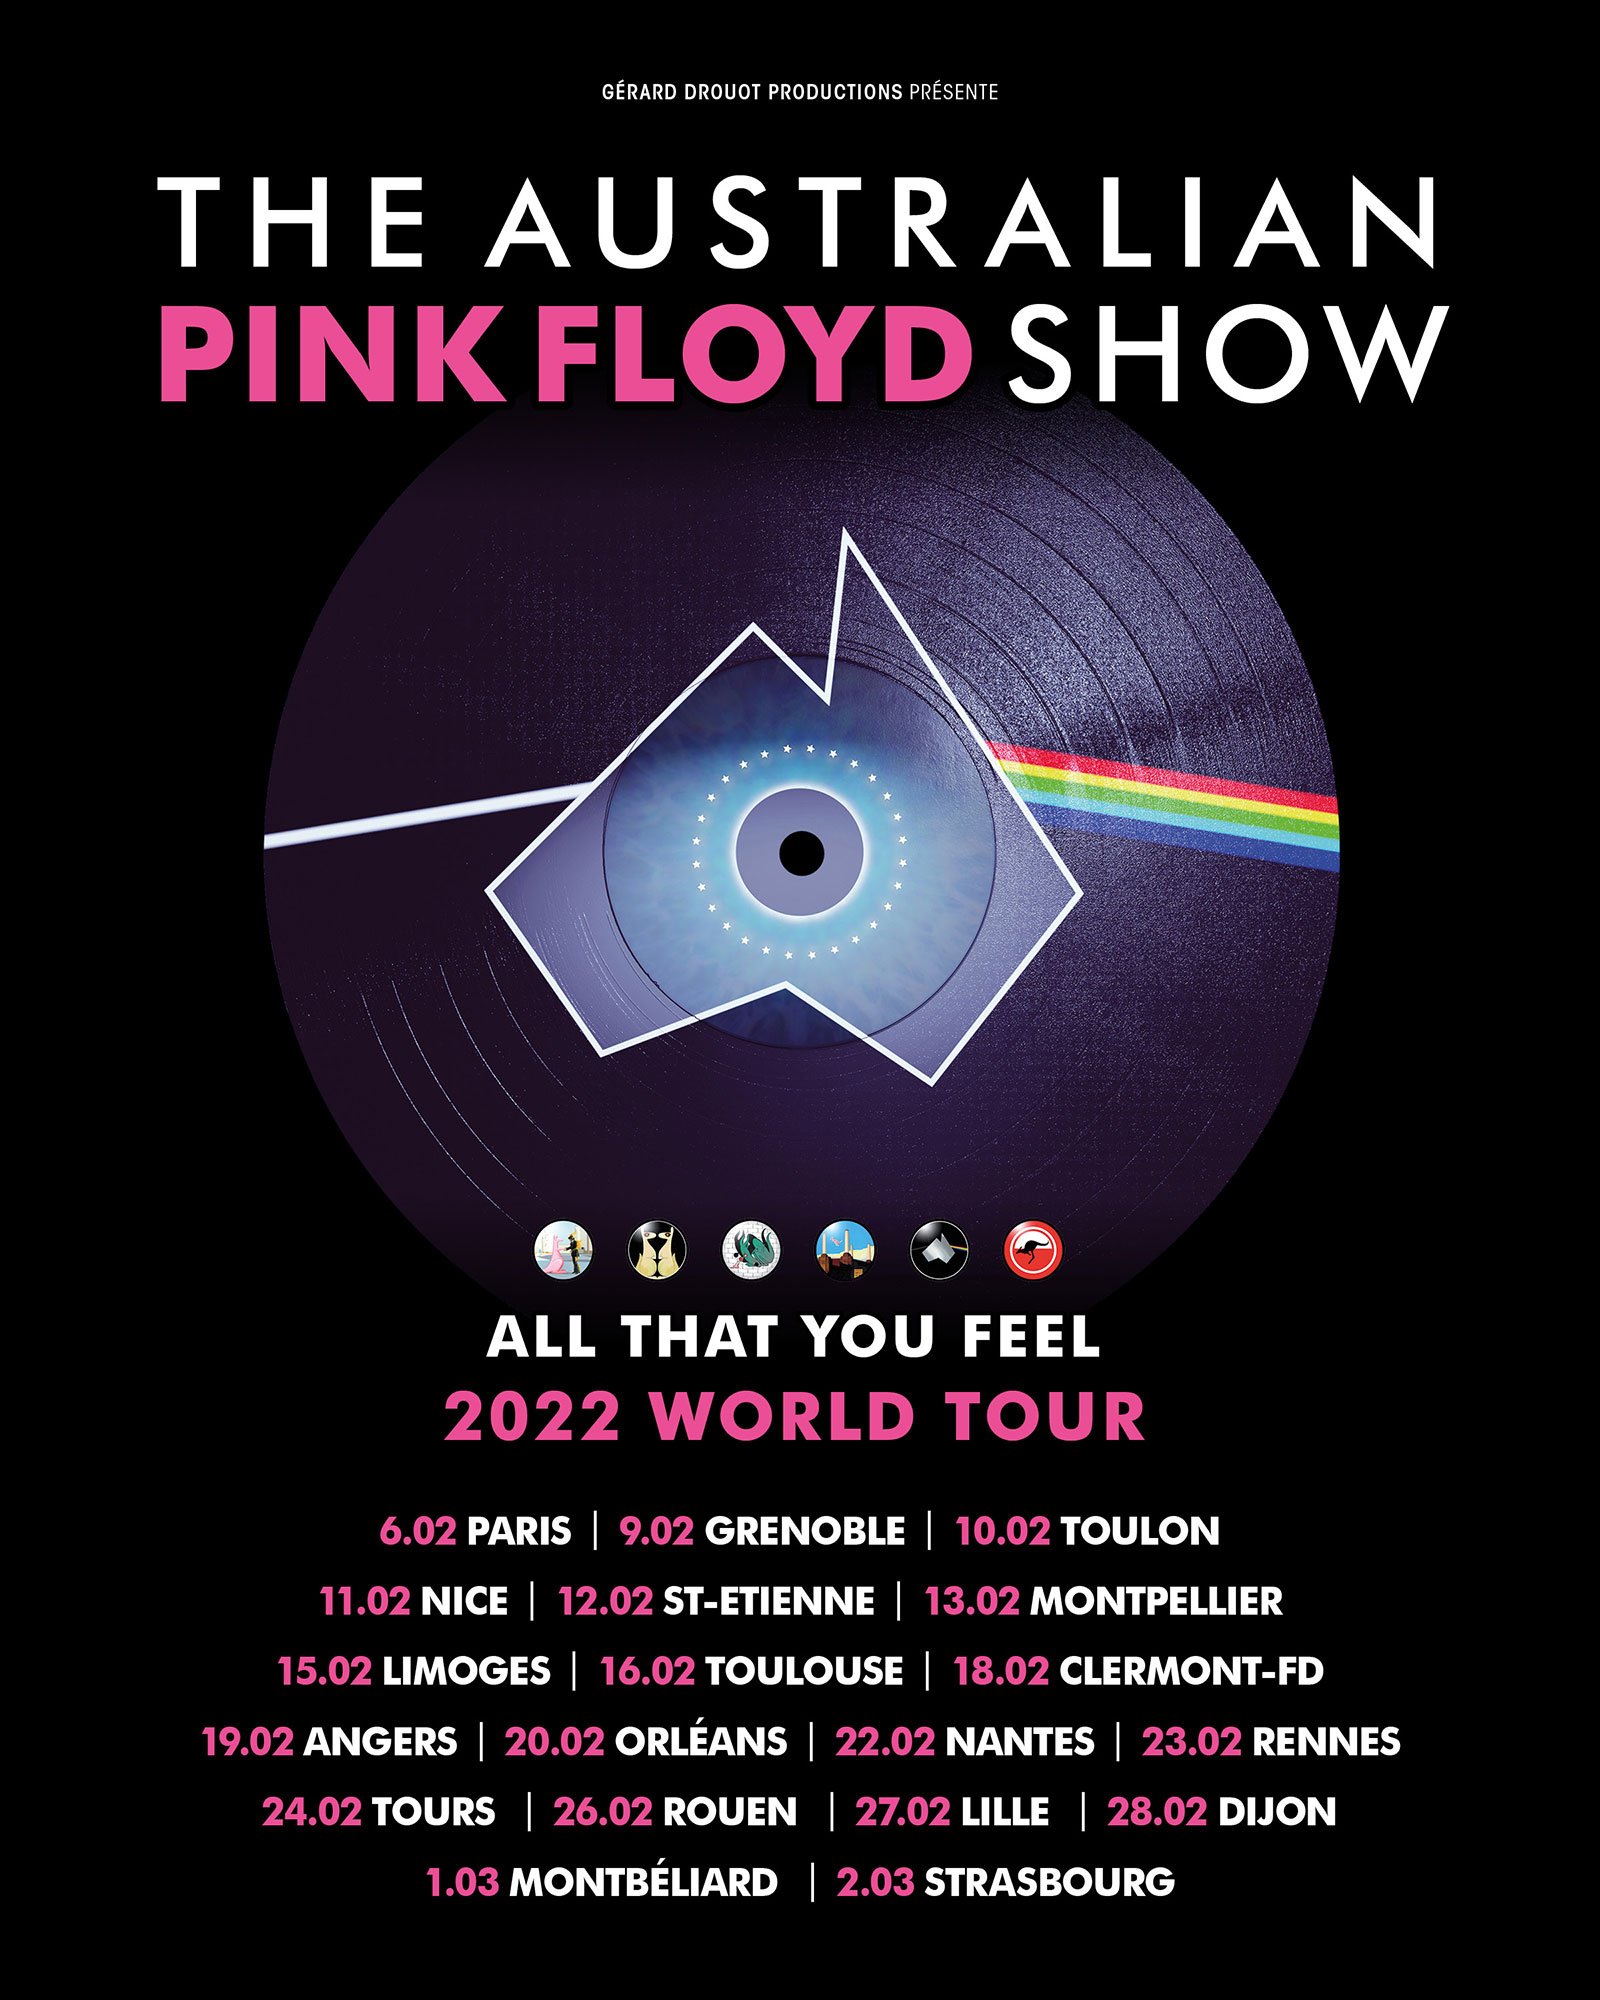 The Pink Floyd: All That You Feel 2022 World Tour at Le Summum on 9 Feb 2022 | Last.fm